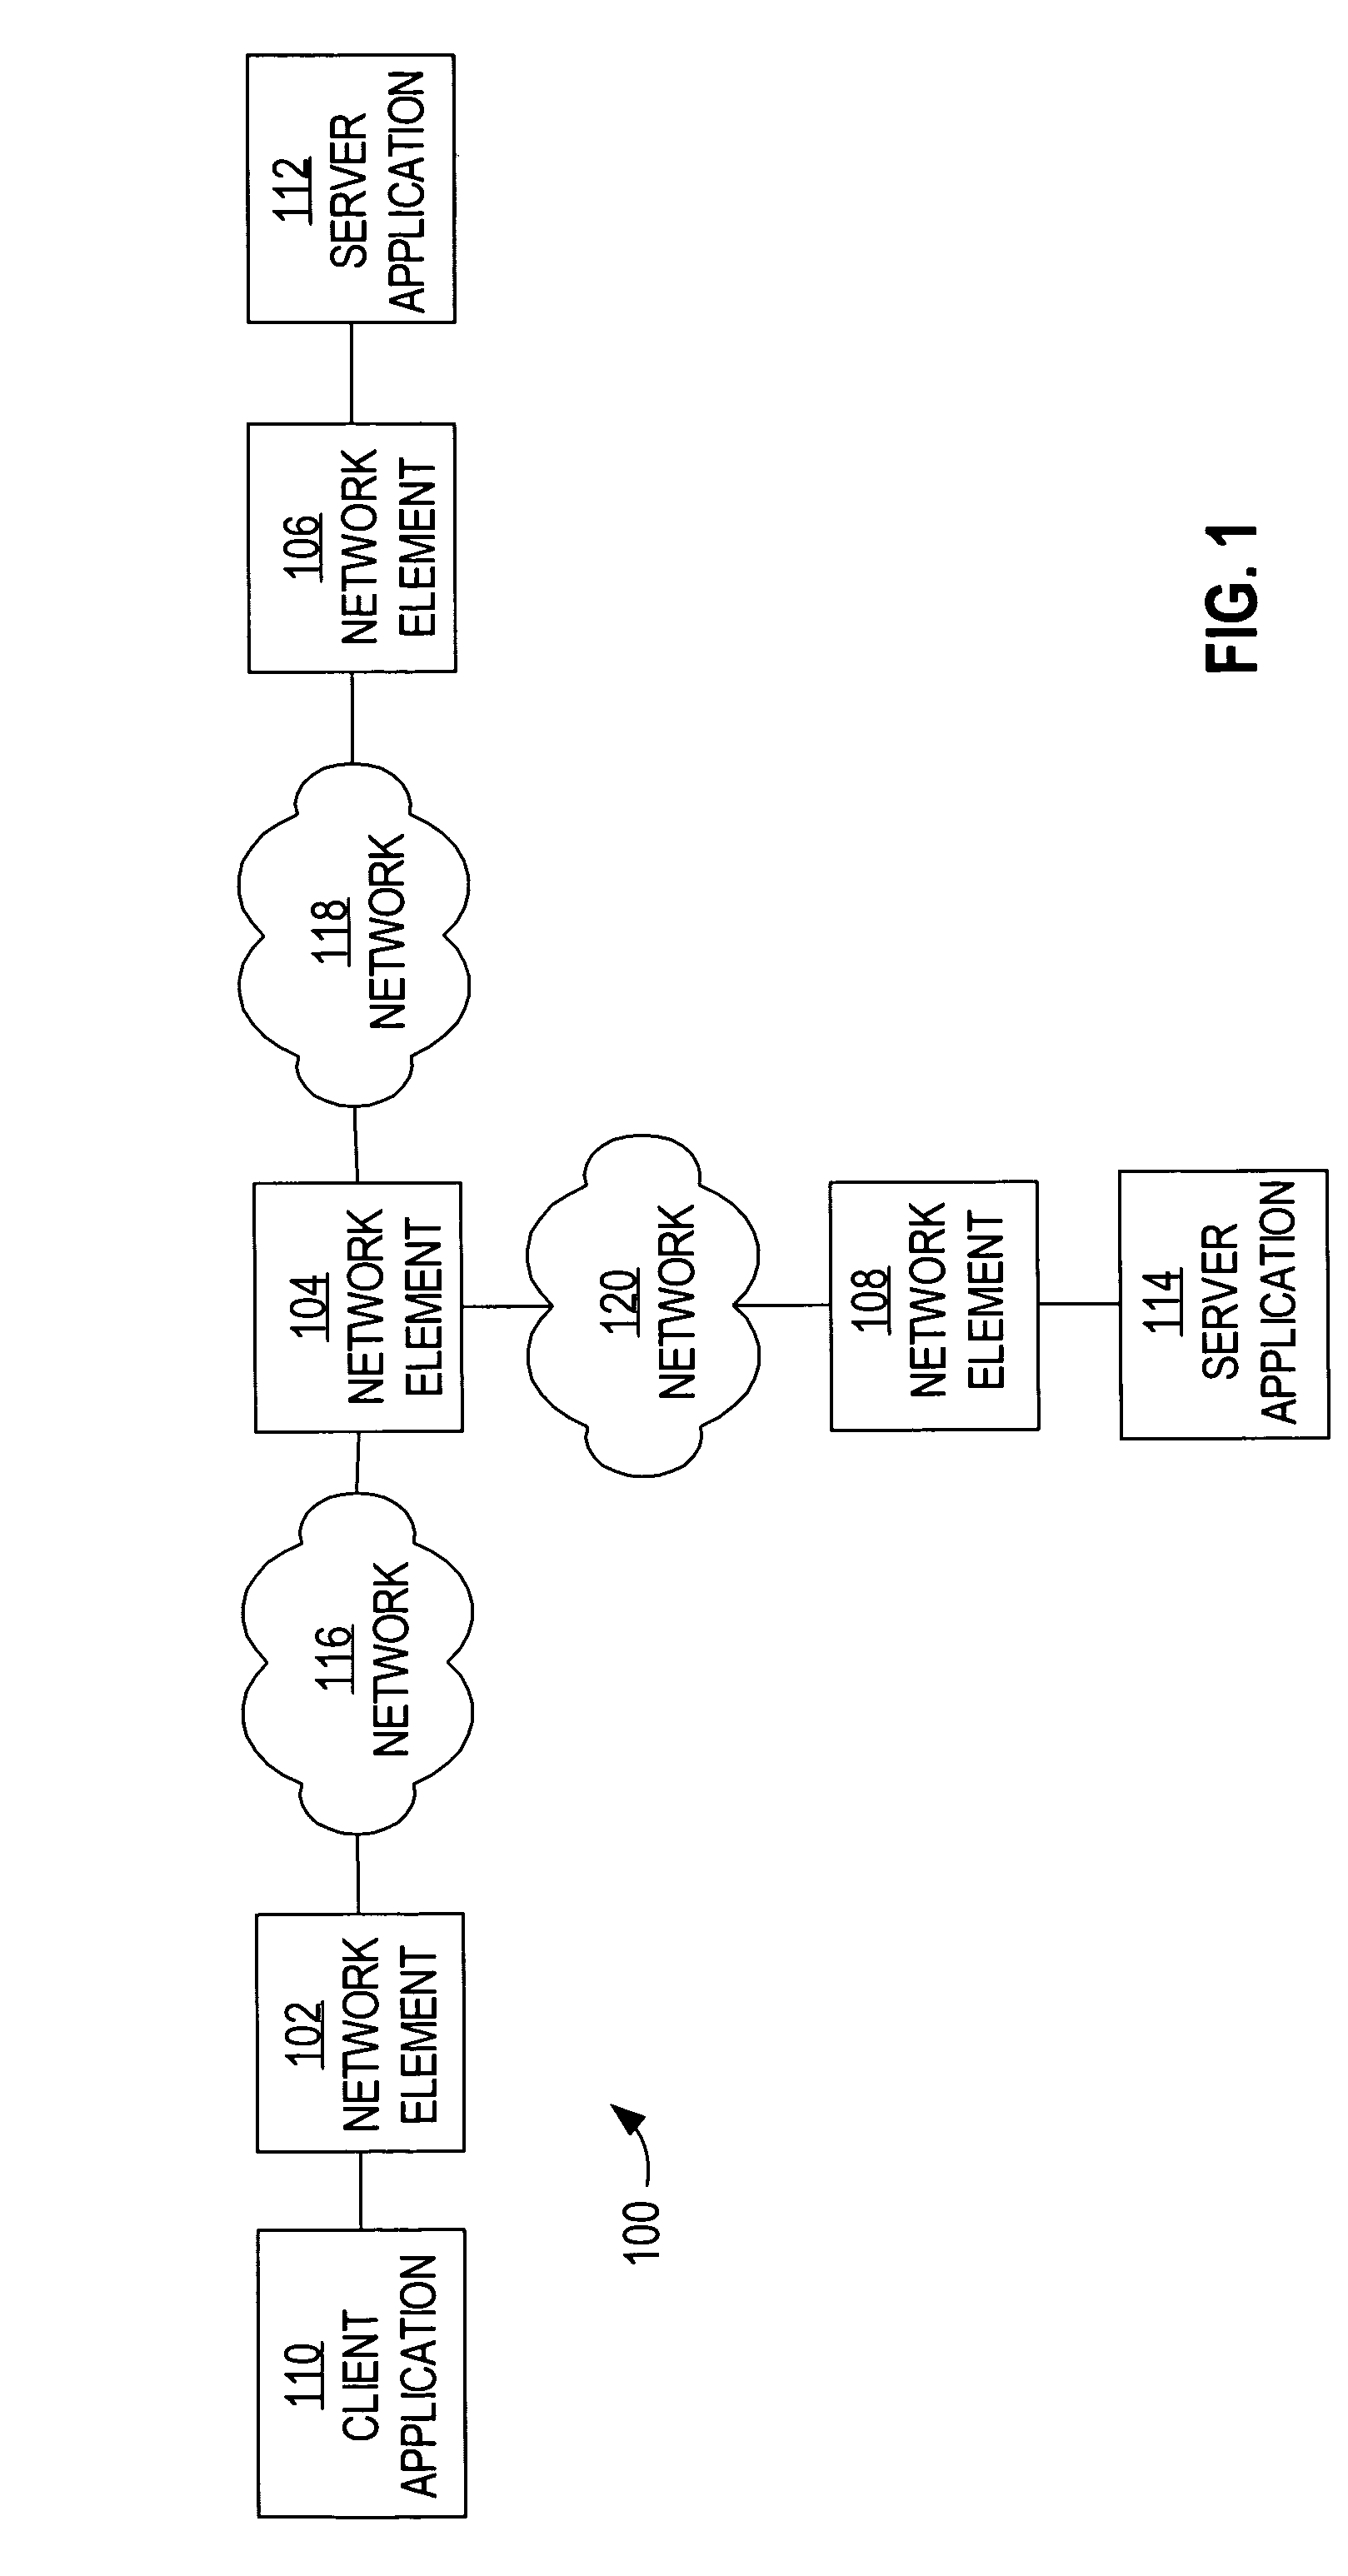 Method and apparatus for generating a network topology representation based on inspection of application messages at a network device